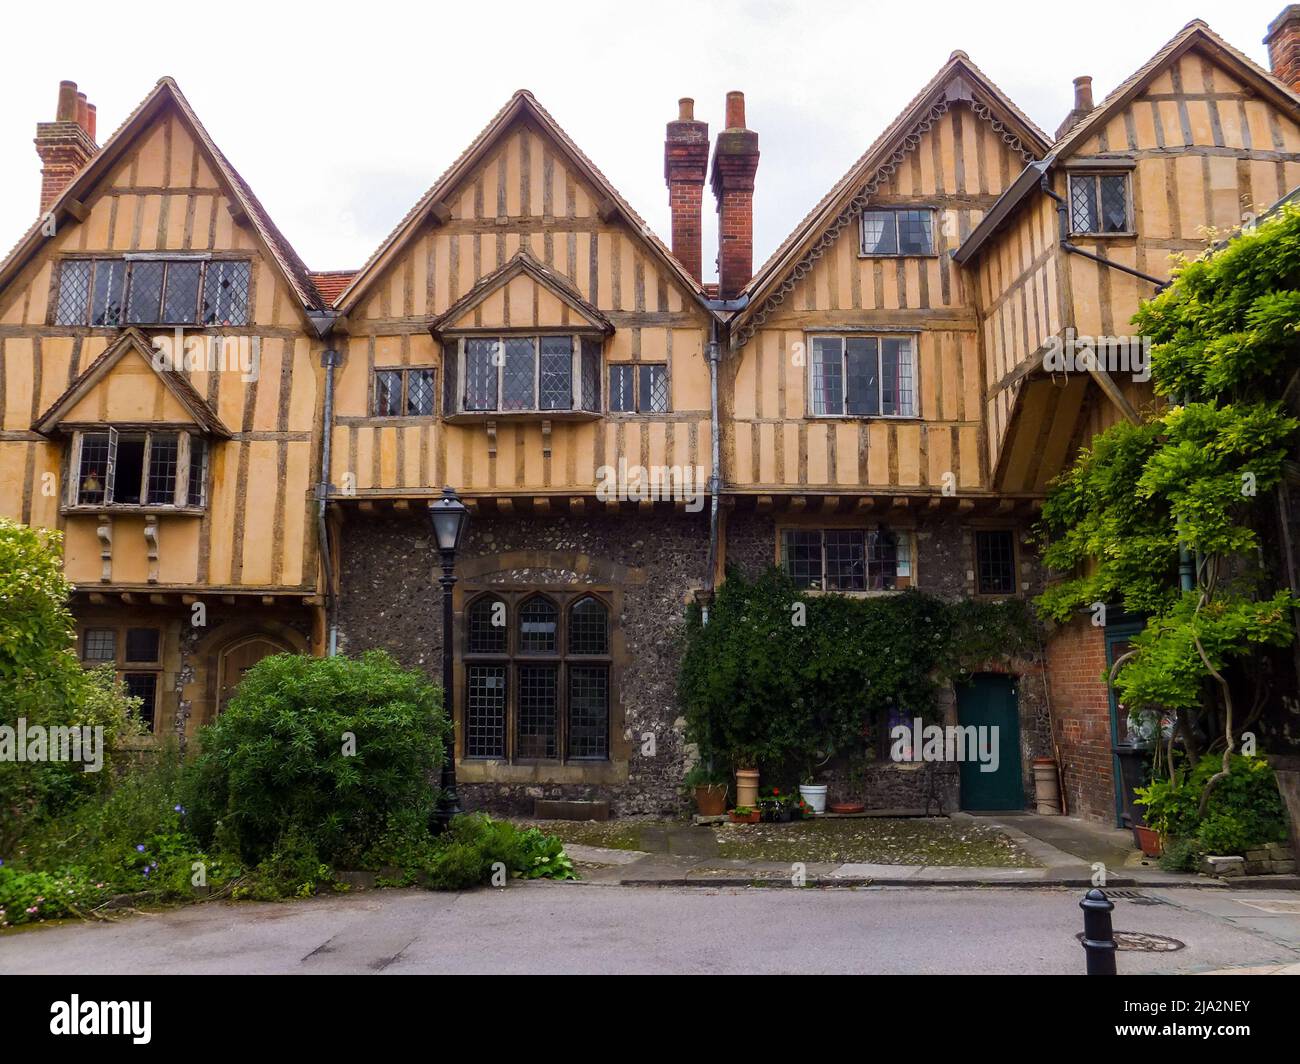 Cheney Court, on the grounds of Winchester Cathedral in Winchester, Hampshire, England, UK, is home to the Headmaster of the Pilgrims' School. Stock Photo